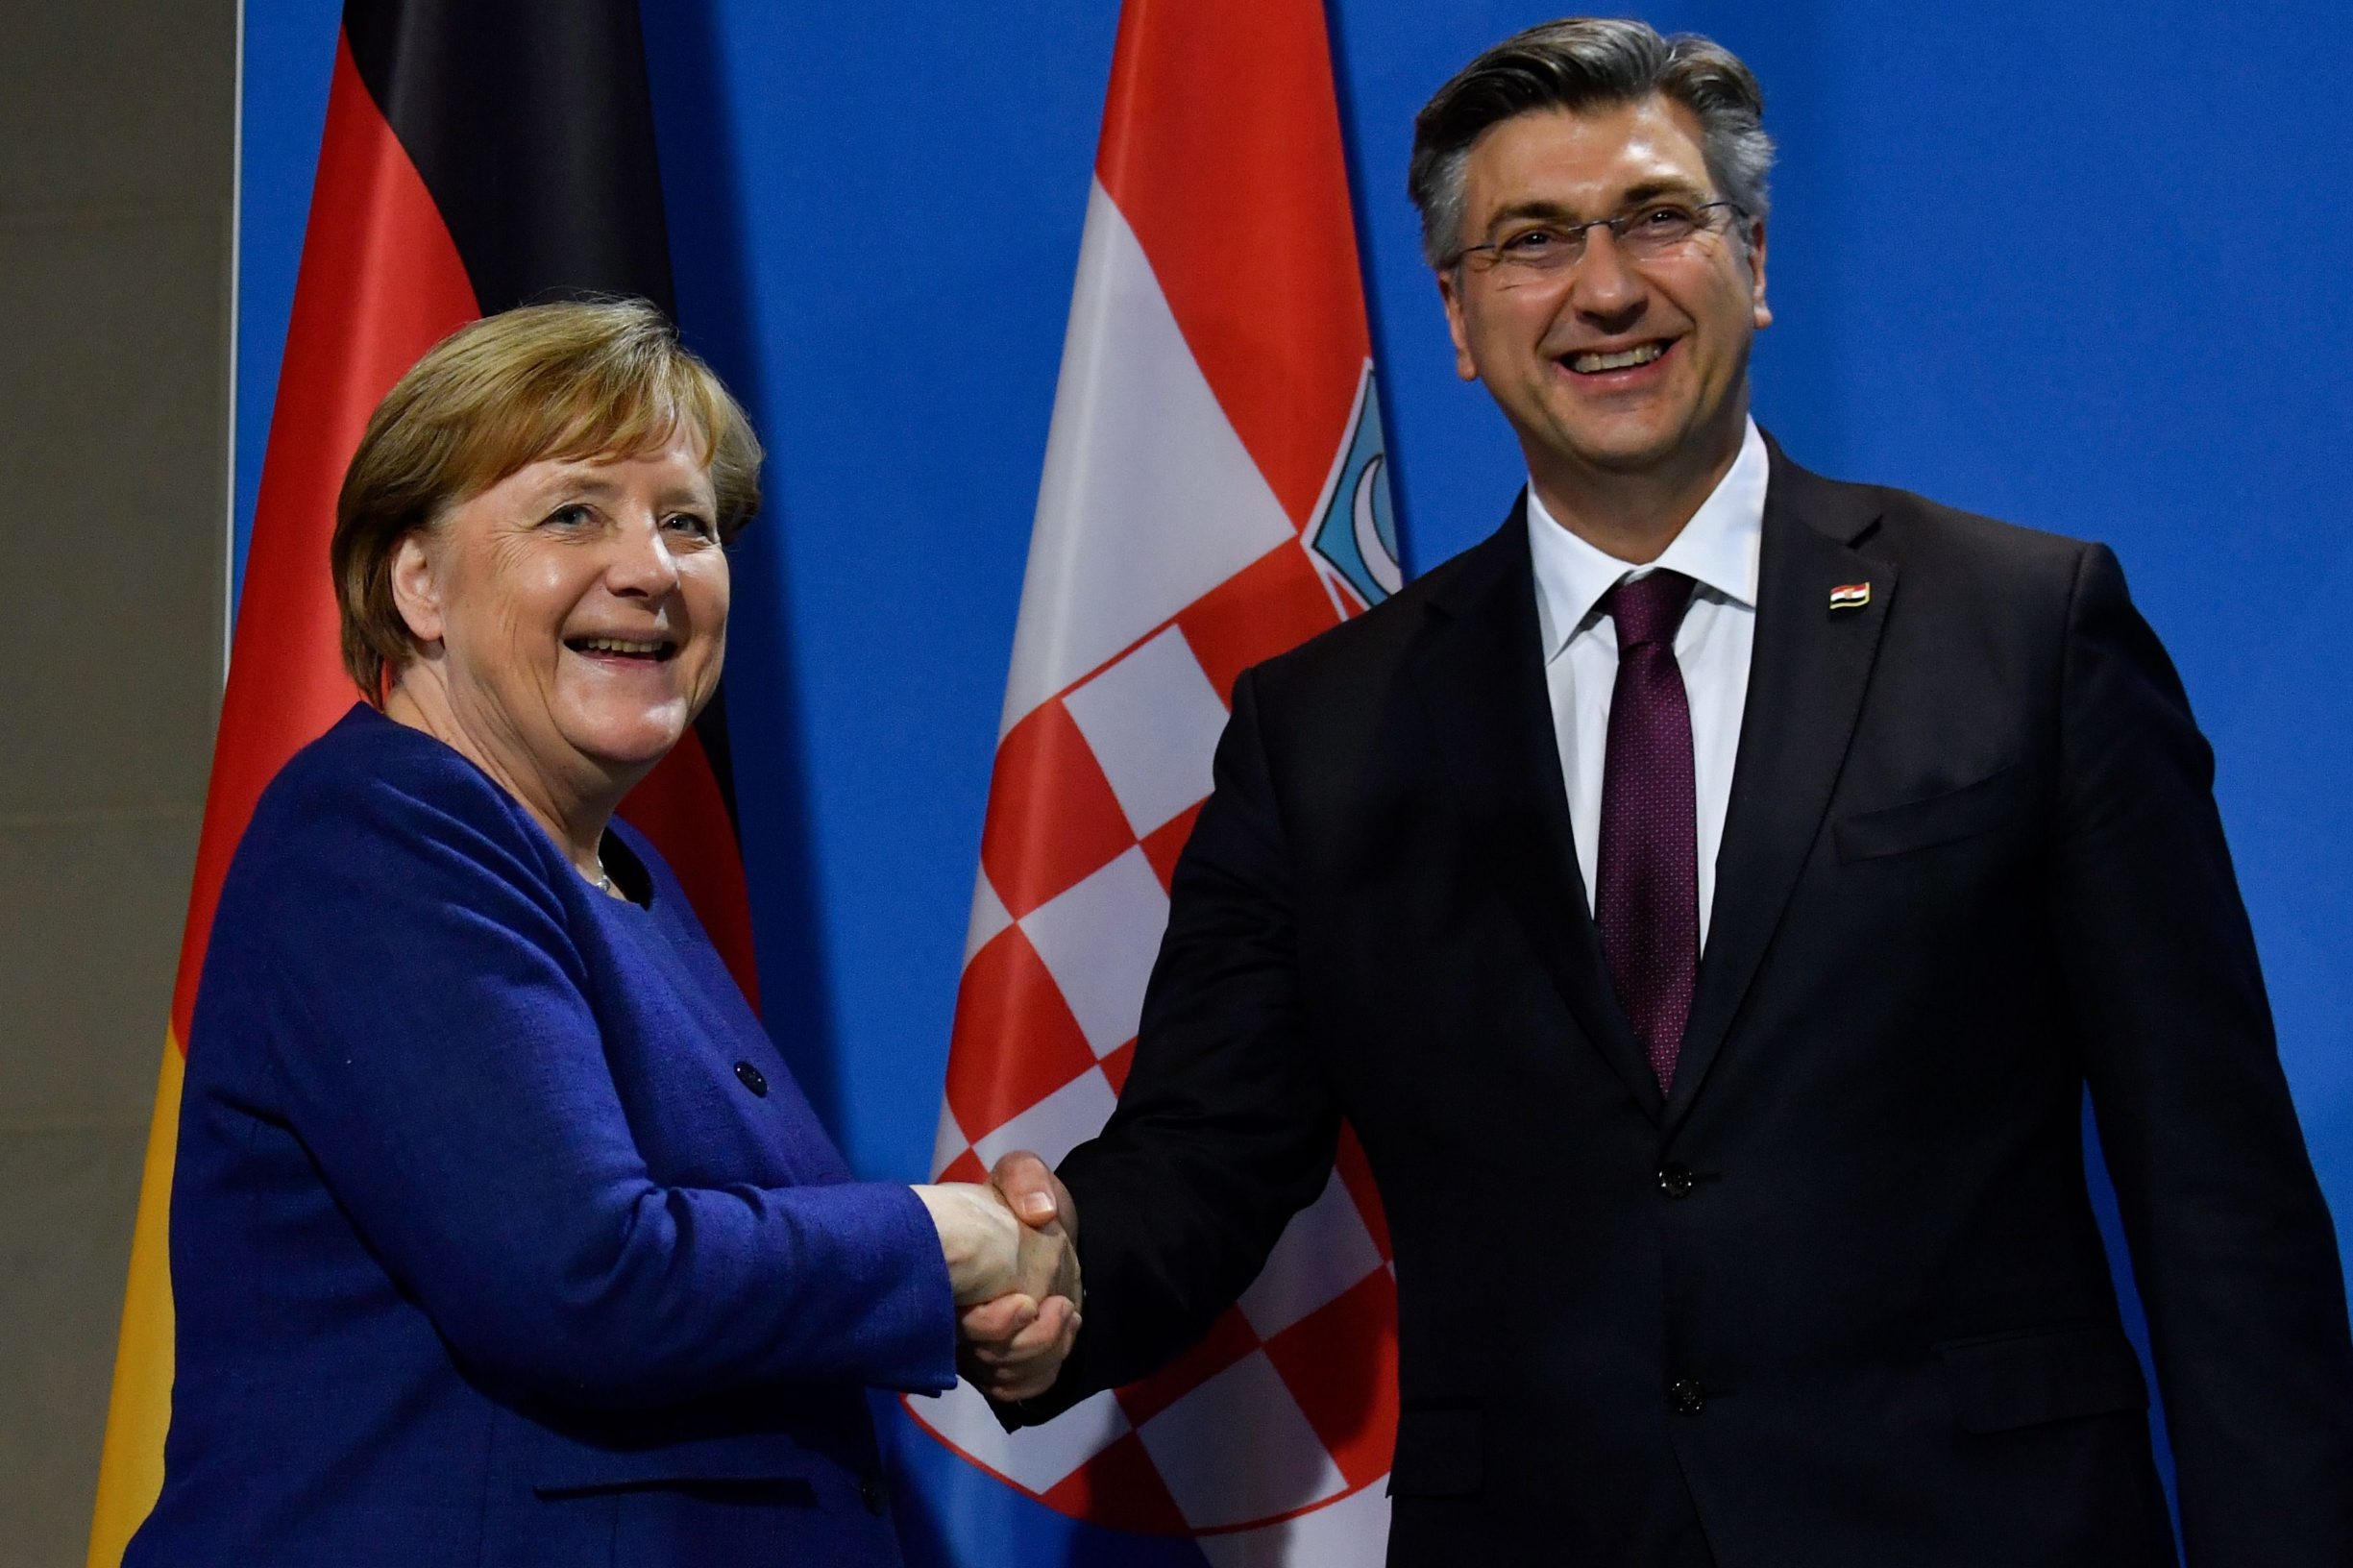 German Chancellor Angela Merkel (L) and Croatian Prime Minister Andrej Plenkovic shake hands after a press conference at the Chancellery on January 16, 2020 in Berlin. (Photo by John MACDOUGALL / AFP)